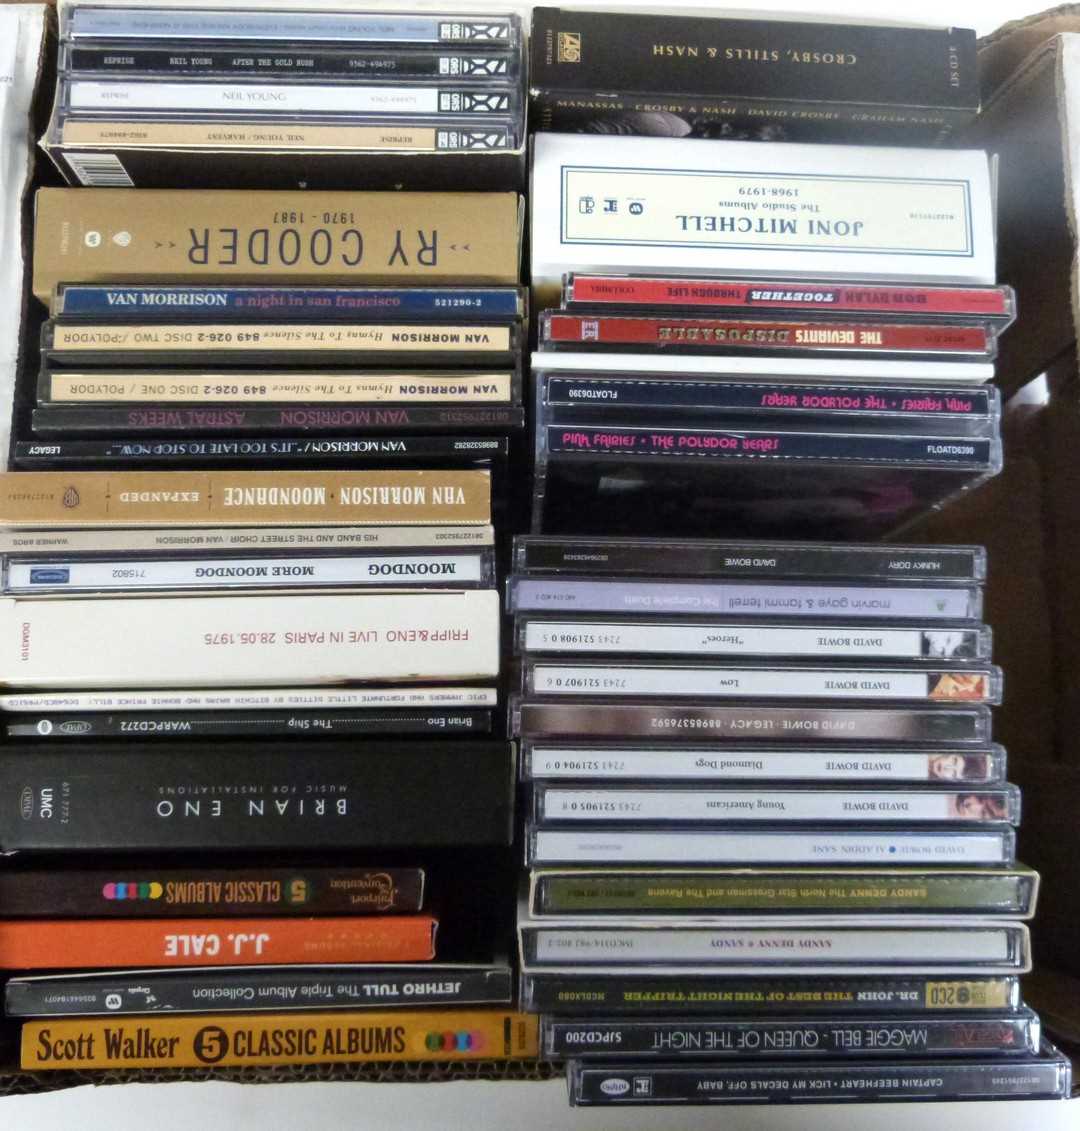 A collection of CDs and box-sets to include David Bowie, Neil Young, Brian Eno, Robert Fripp, Ry - Image 4 of 4